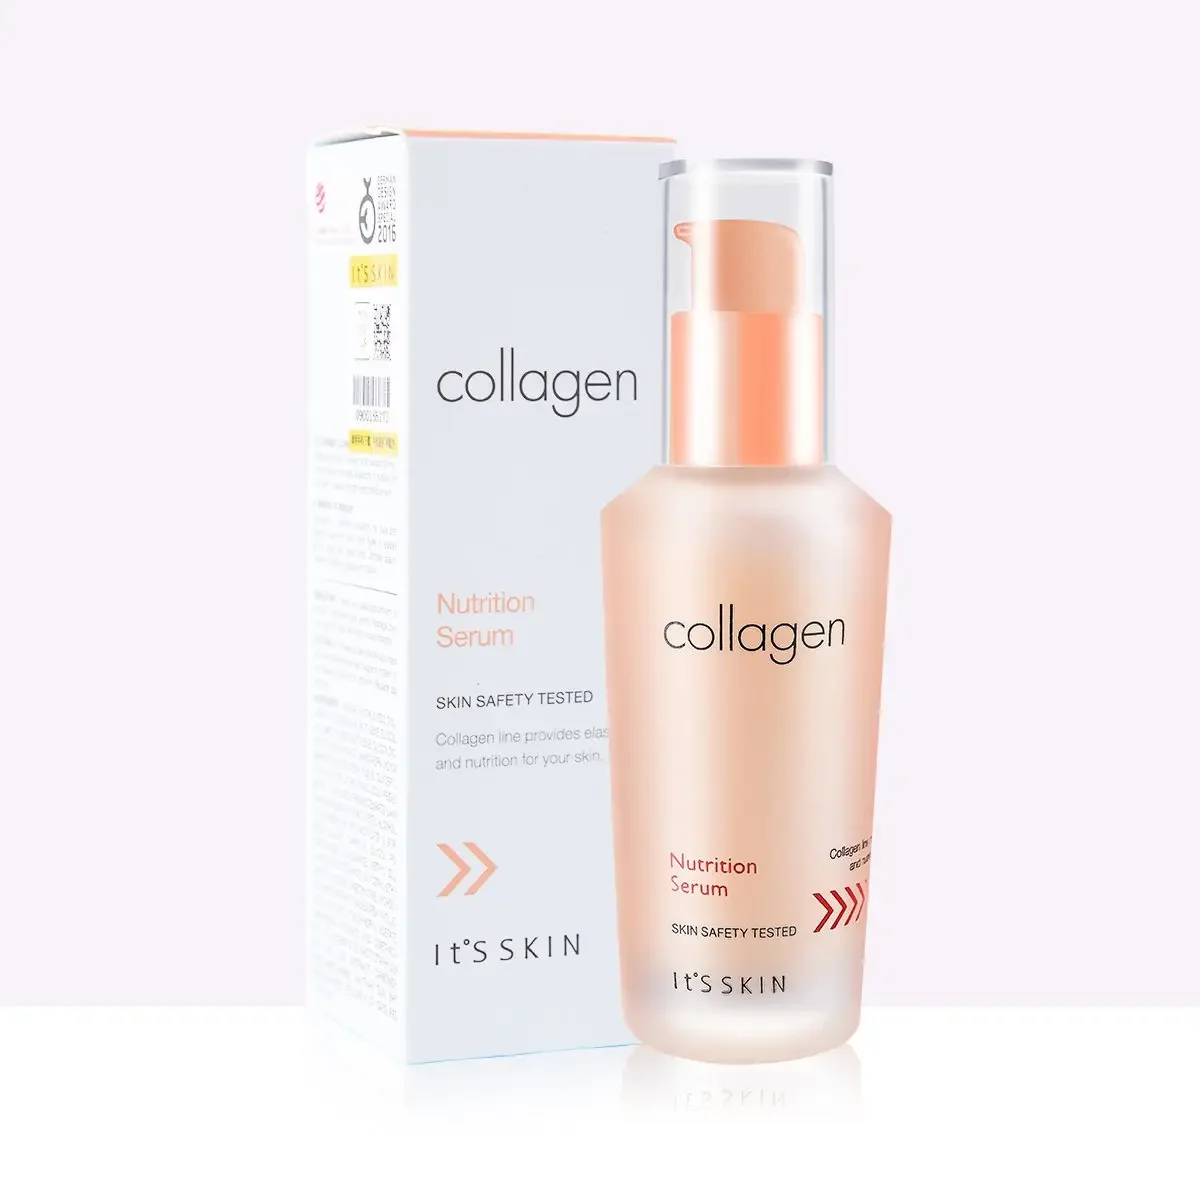 IT'S SKIN Collagen Nutrition Serum 40ml Collagen Power Lifting Emulsion Moisturizing Facial Serum Anti-aging Face Essence 90pcs capsules face serum spot acne removing moisturizing nutrition whitening freckle concentrated essence perfect skin care